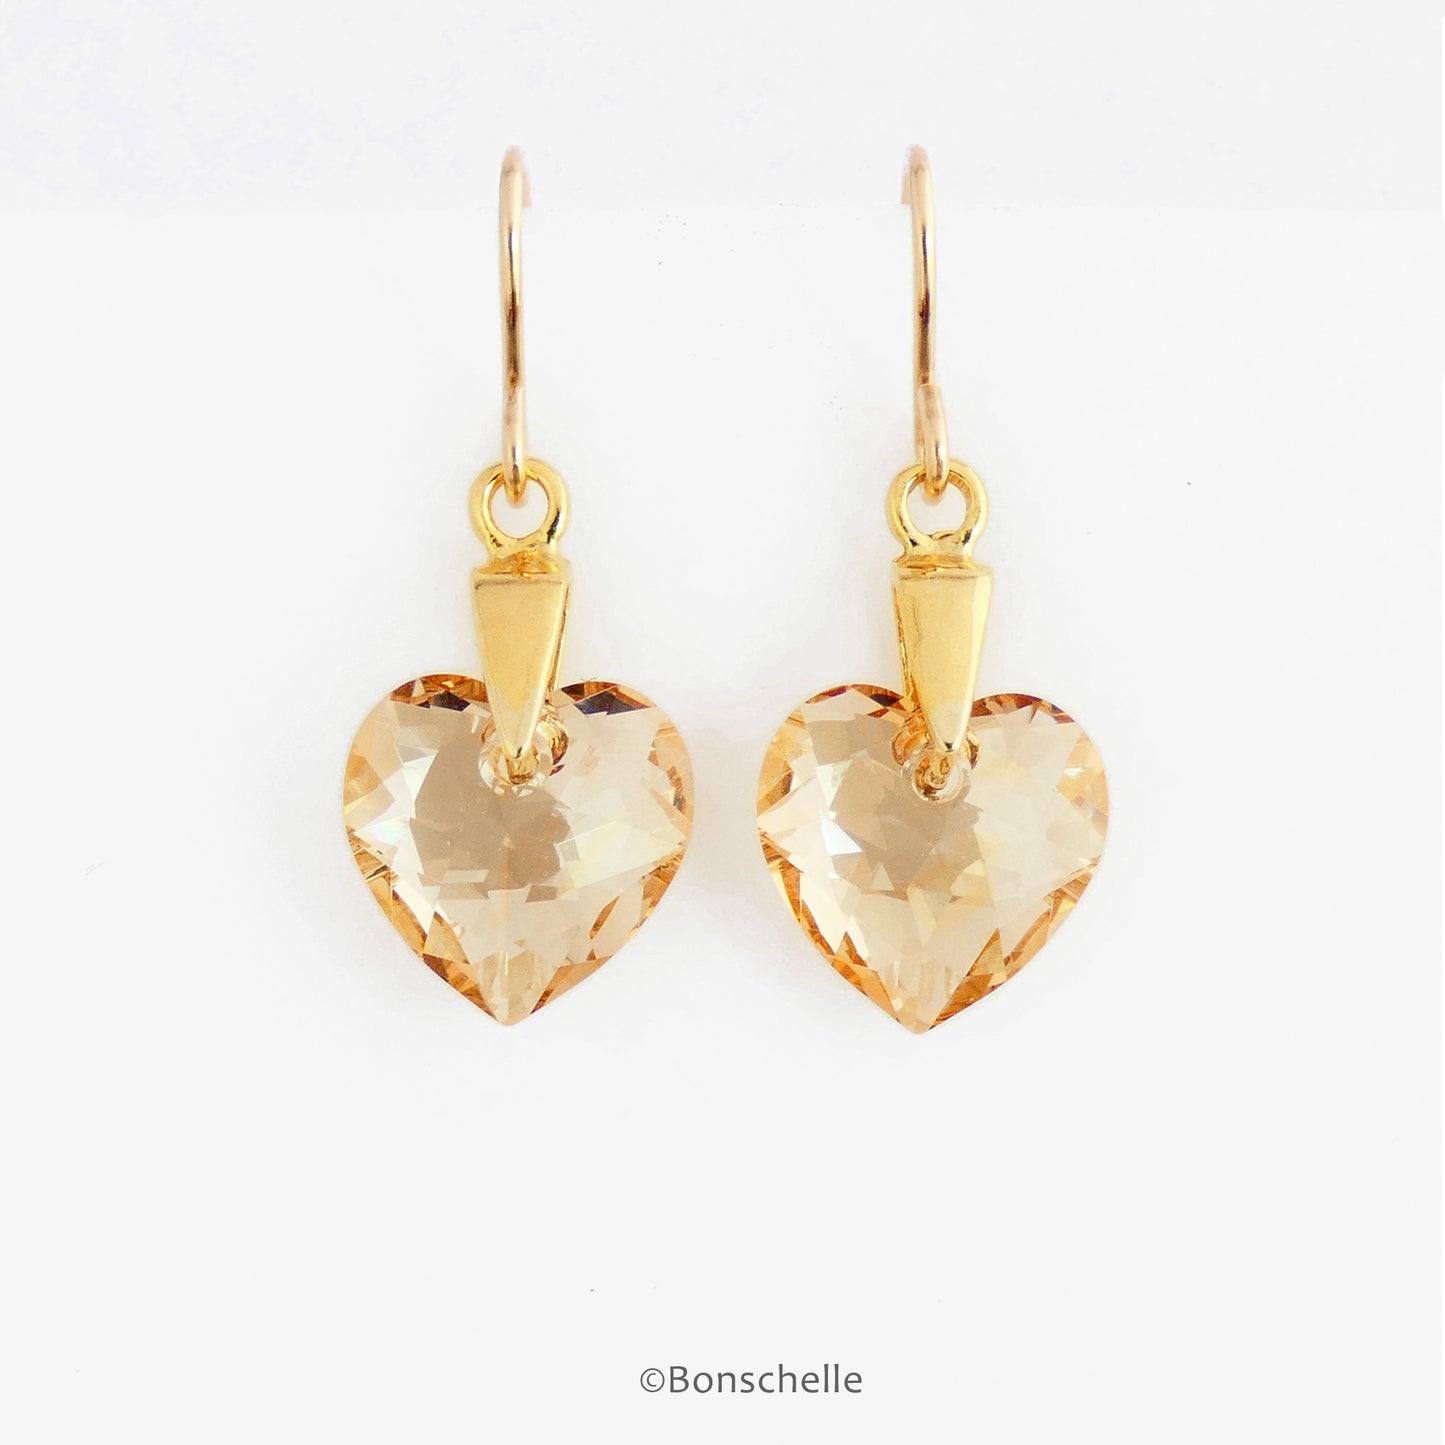 Hanging Handmade earrings with pale golden bronze toned Swarovski crystal heart earrings and 14K gold filled earwires 